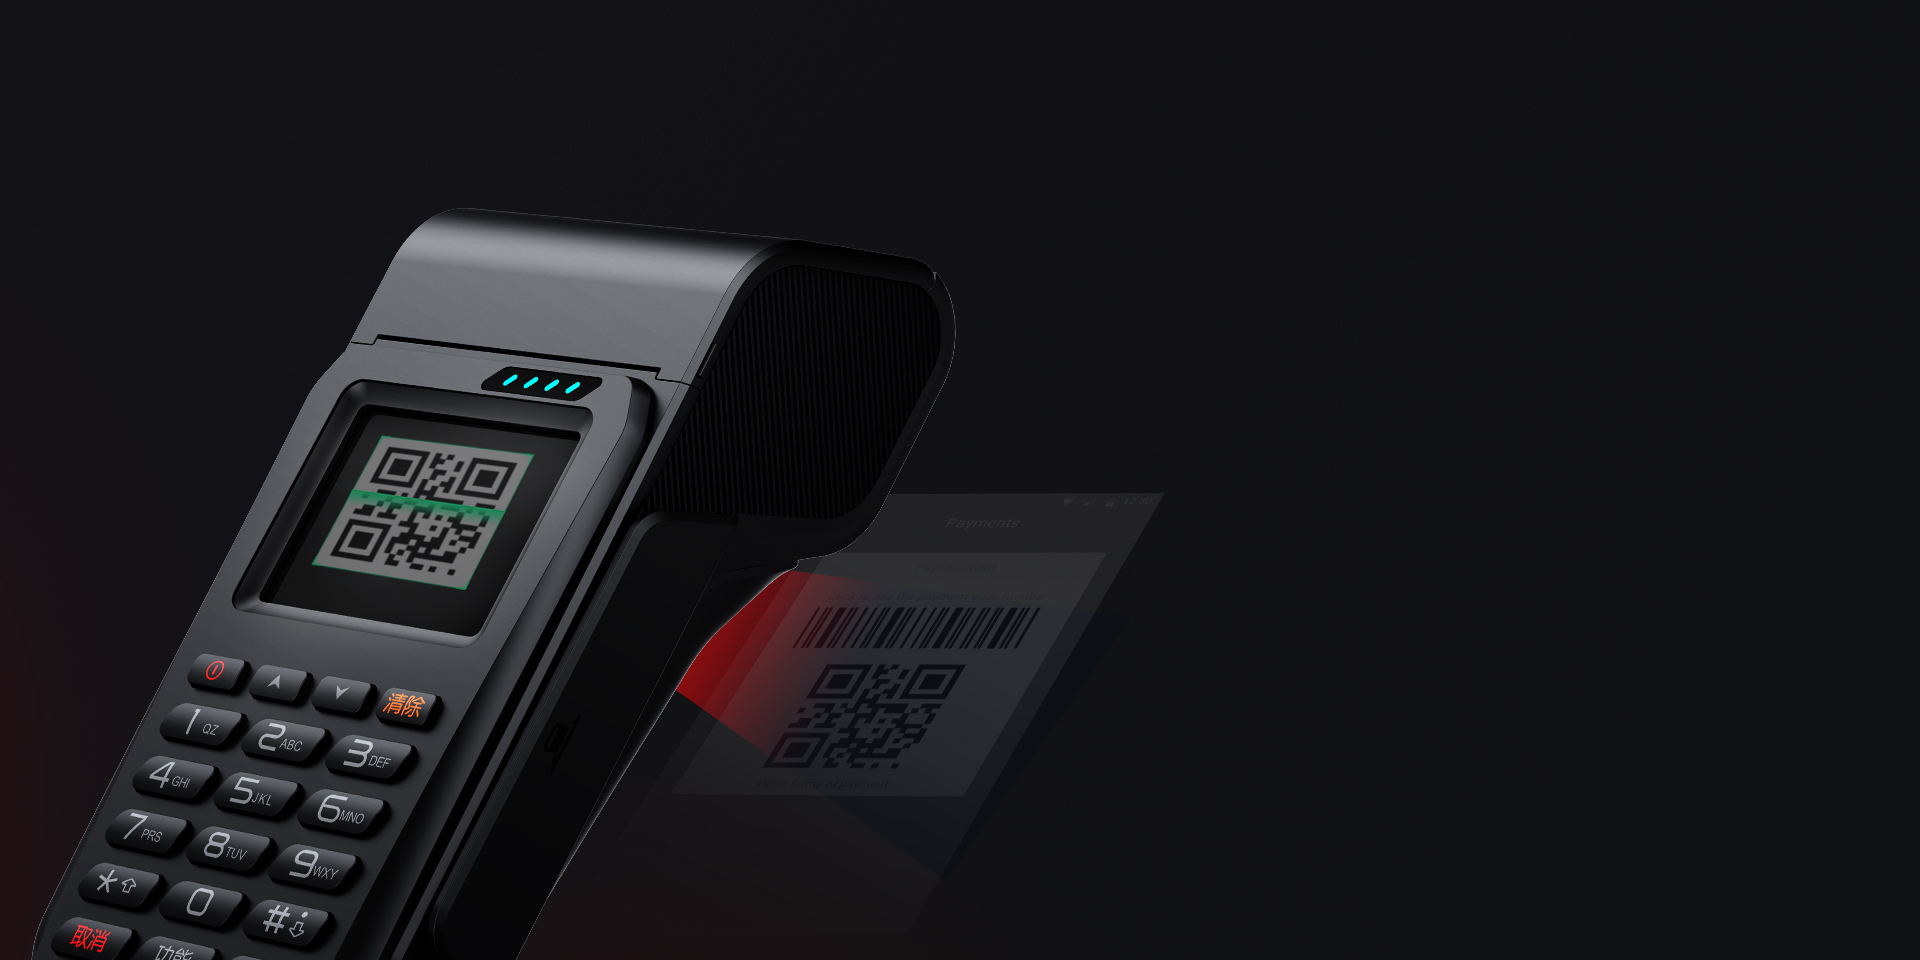 Introducing the Wisecard T50: the Future of POS Technology!